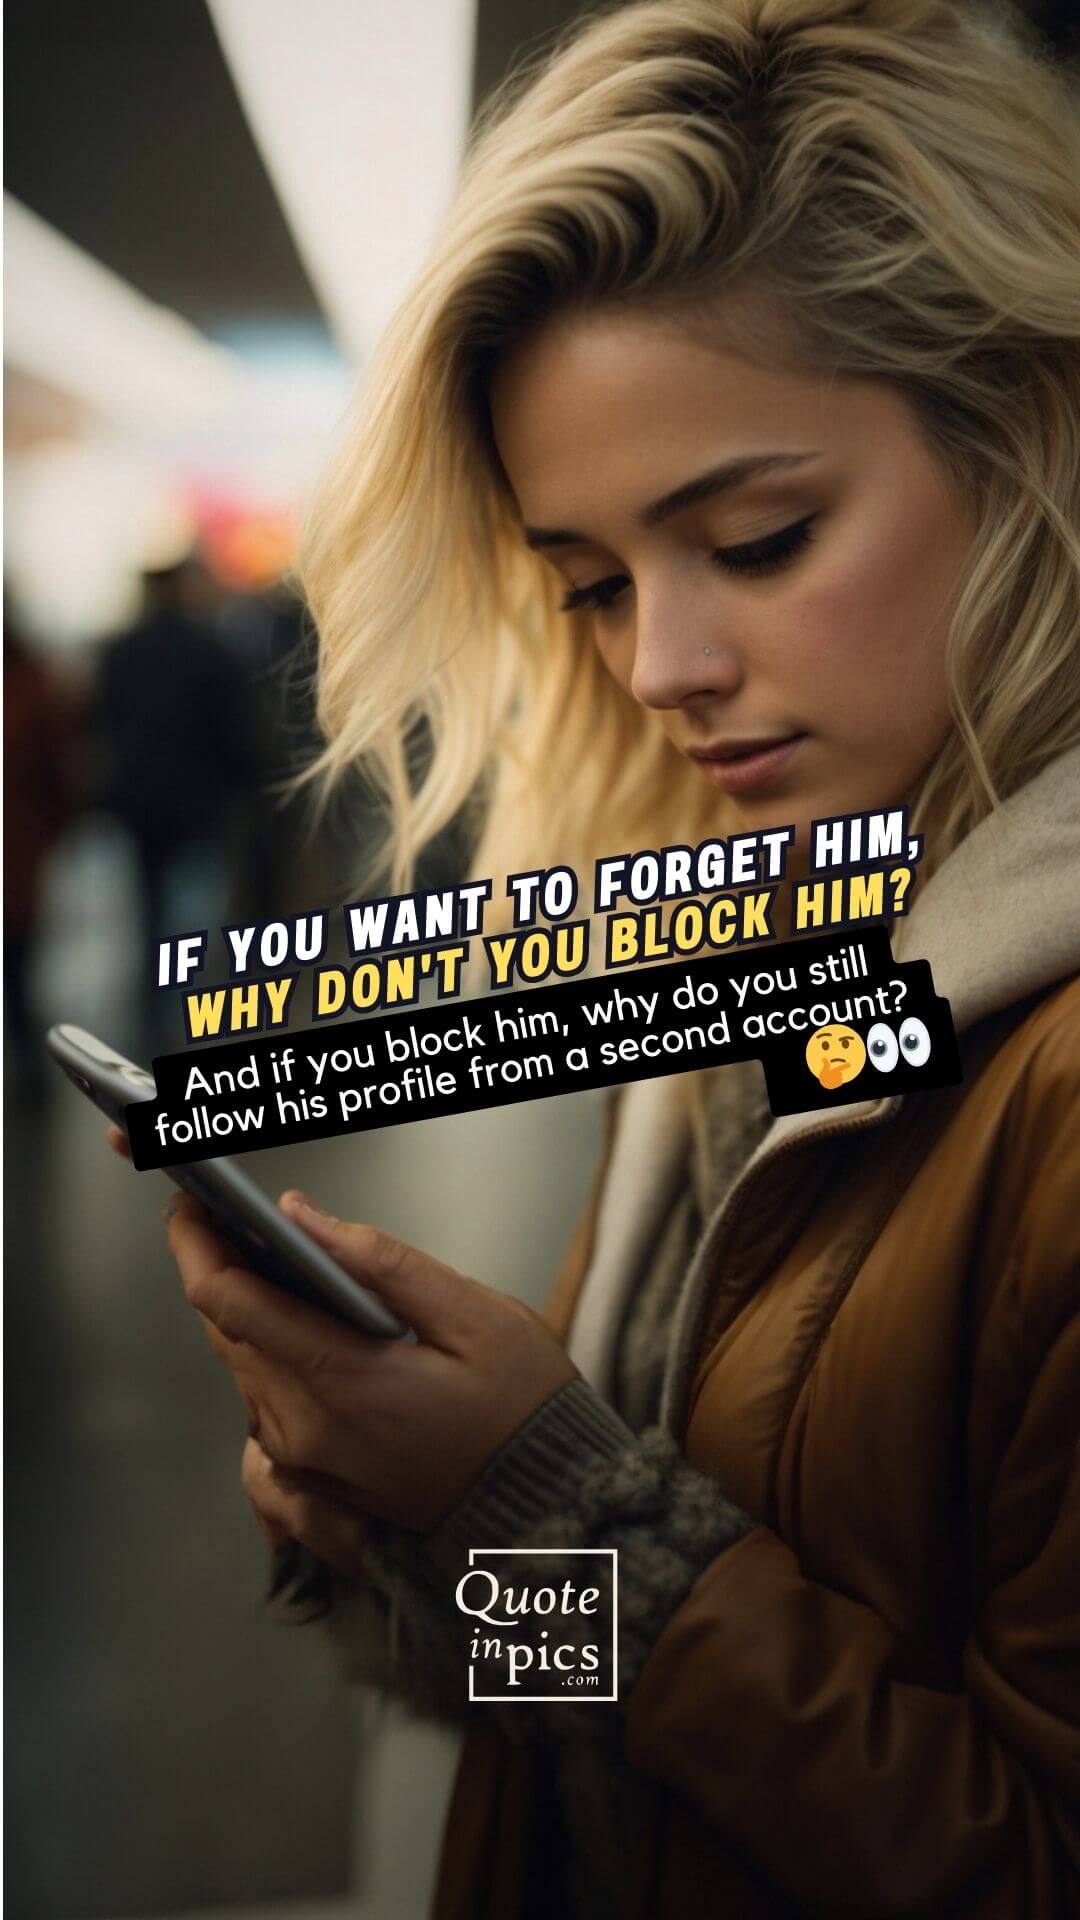 If you want to forget him, why don't you block him?